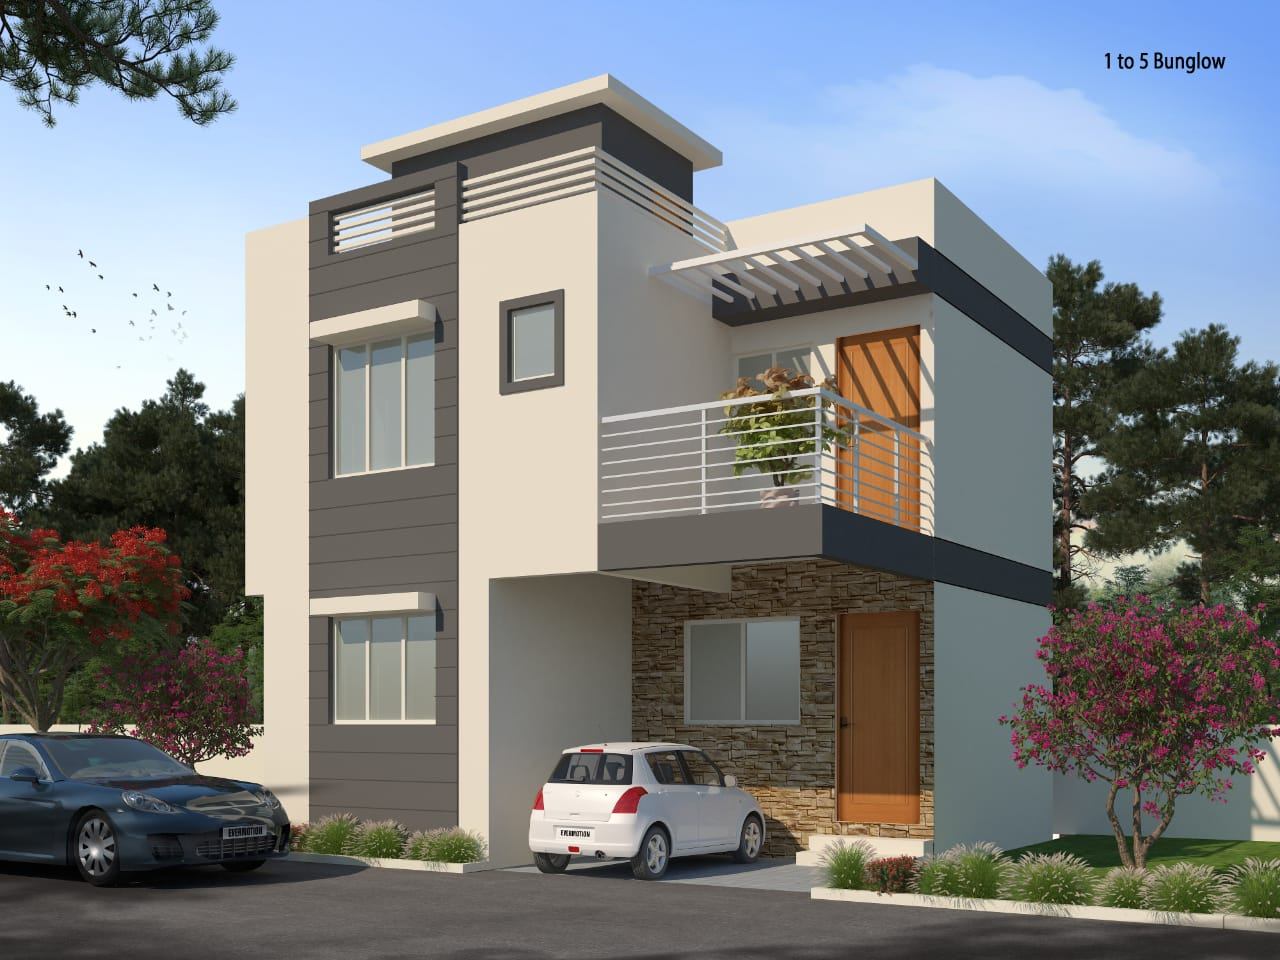 3 Bed/ 3 Bath Sell House/ Bungalow/ Villa; 1,400 sq. ft. carpet area; 1,000 sq. ft. lot for sale @Lohgaon, pune